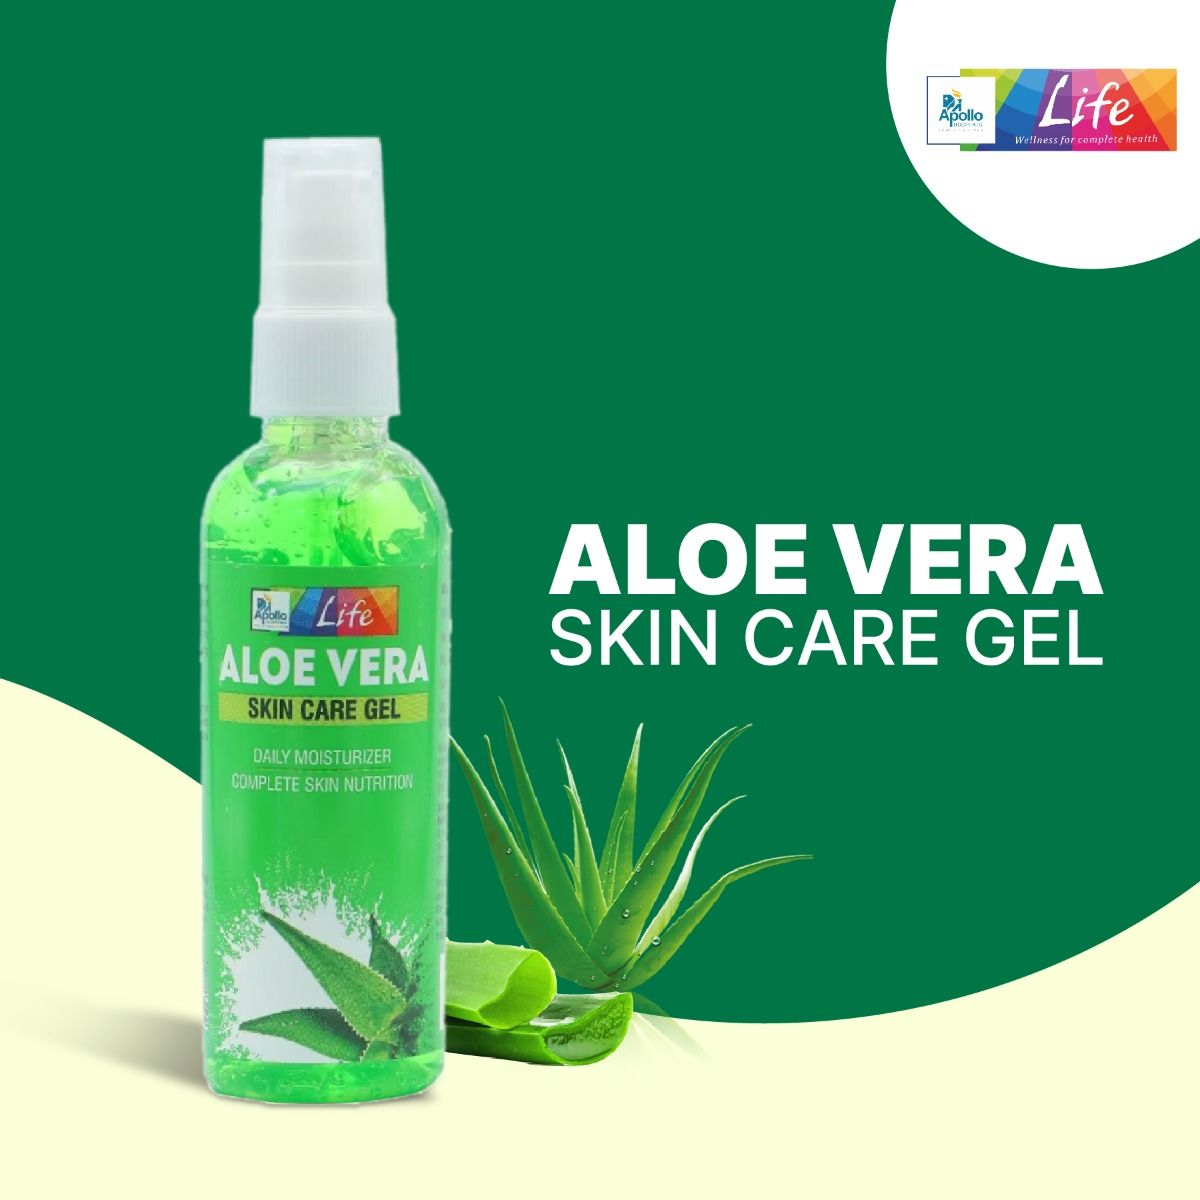 Apollo Life Aloe Vera Skin Care Gel 300 Gm 3x100 Gm Price Uses Side Effects Composition 6326